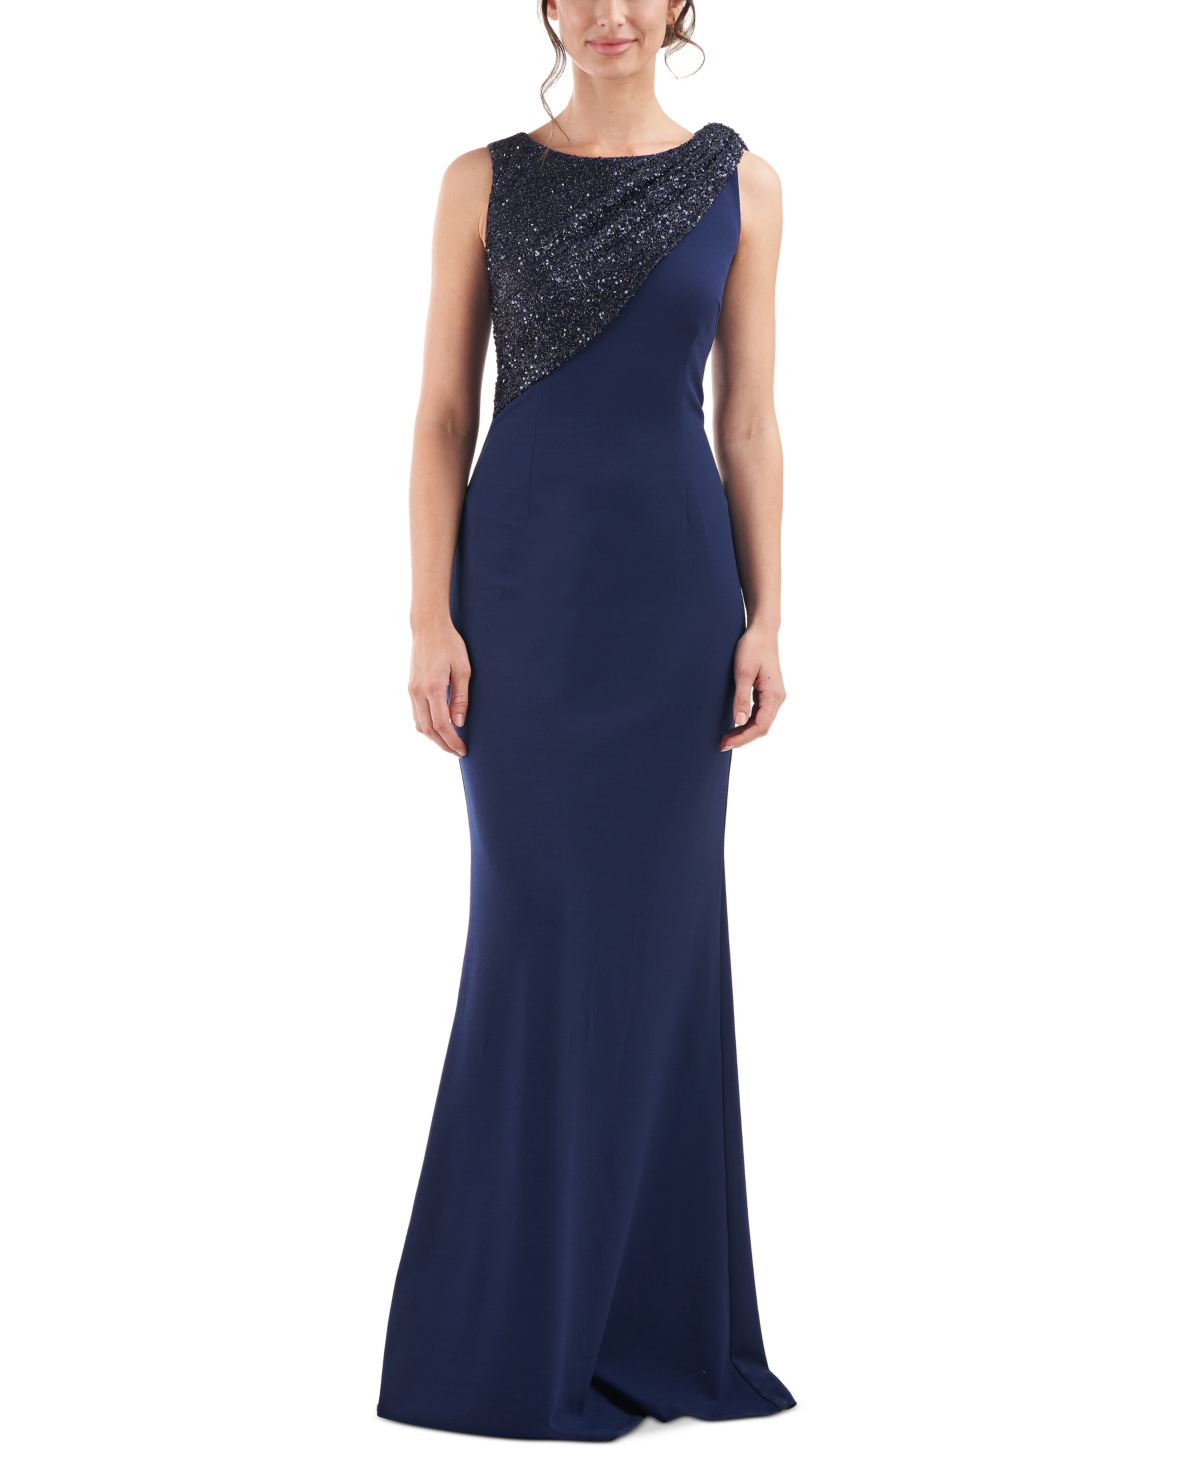 Js Collections Women's Cora Sequined-Sash Gown